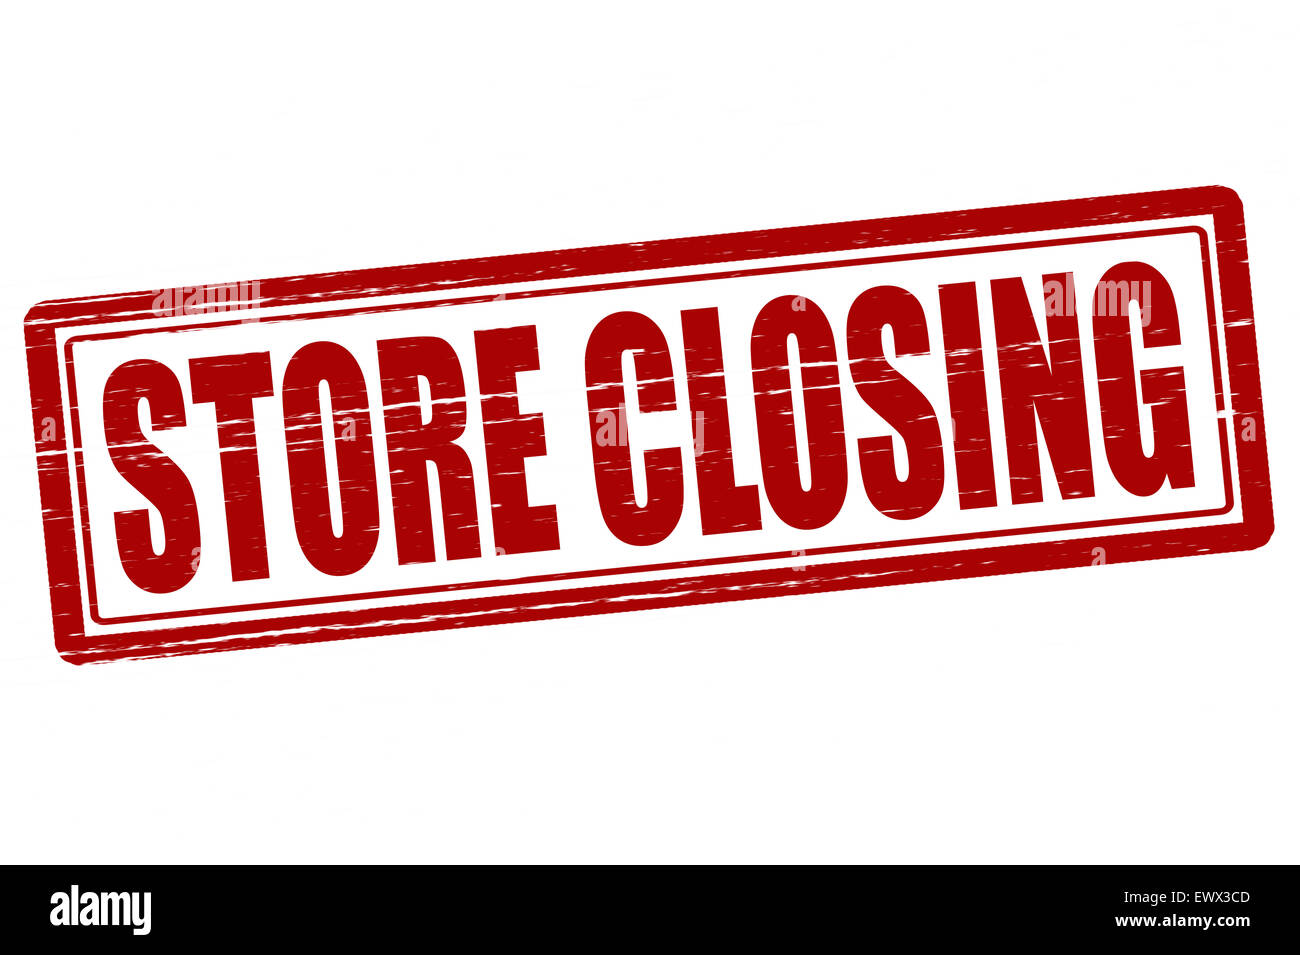 Stamp with text store closing inside, illustration Stock Photo